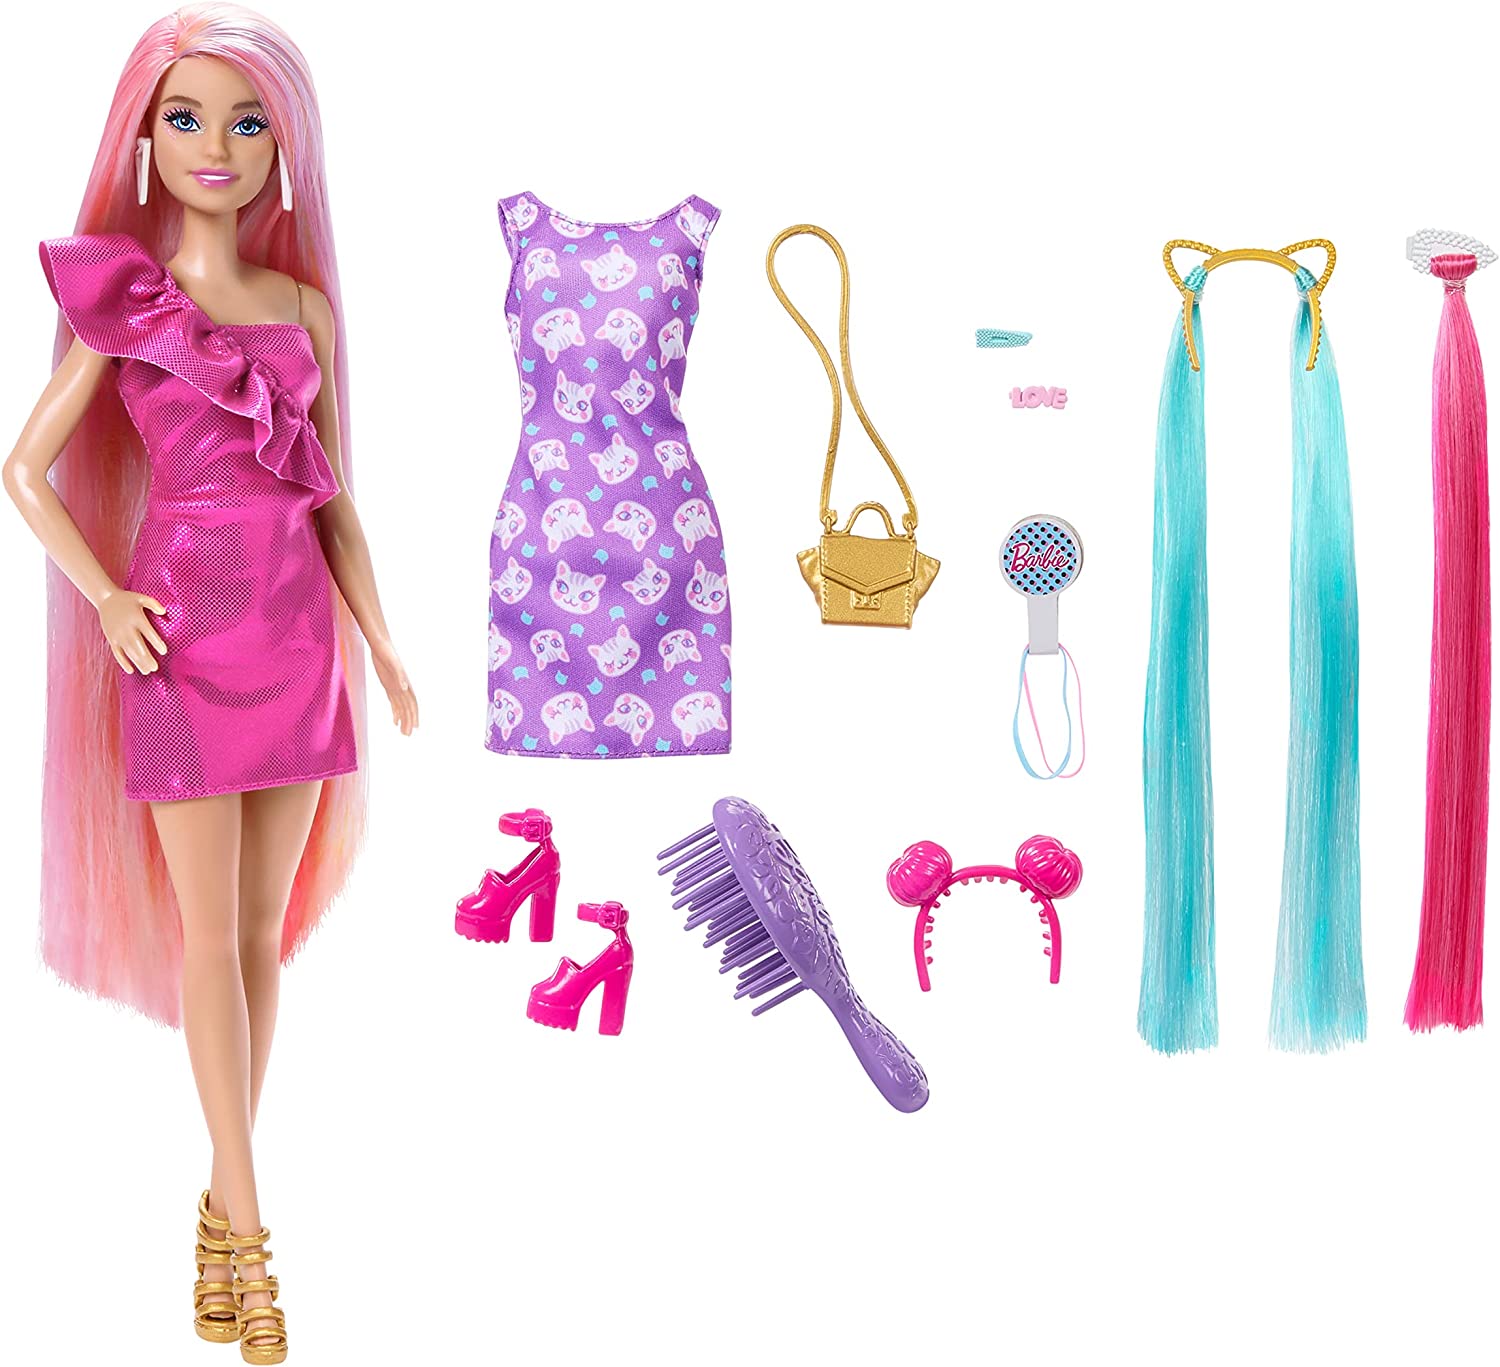 7 hairstyles inspired by Barbie to make bring your Malibu Barbie dream alive